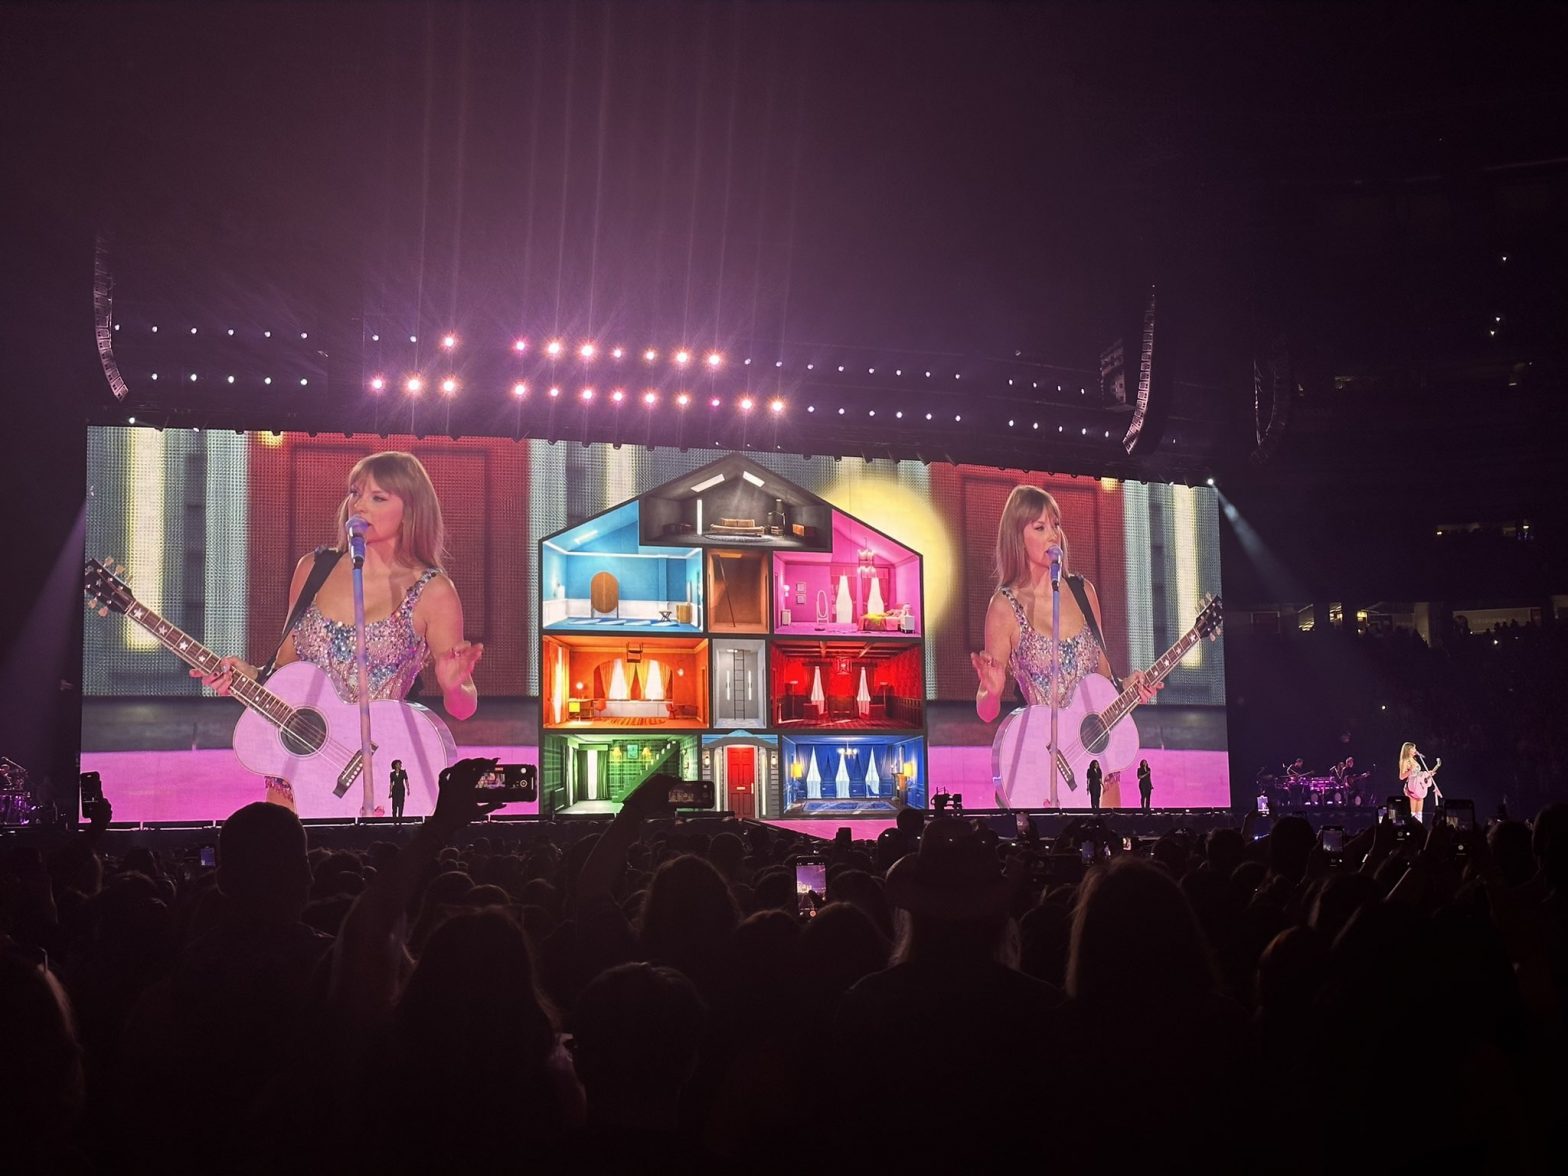 Taylor Swift opens Eras Tour at State Farm Stadium, Glendale with ‘Miss Americana & The Heartbreak Prince’: Here is full setlist